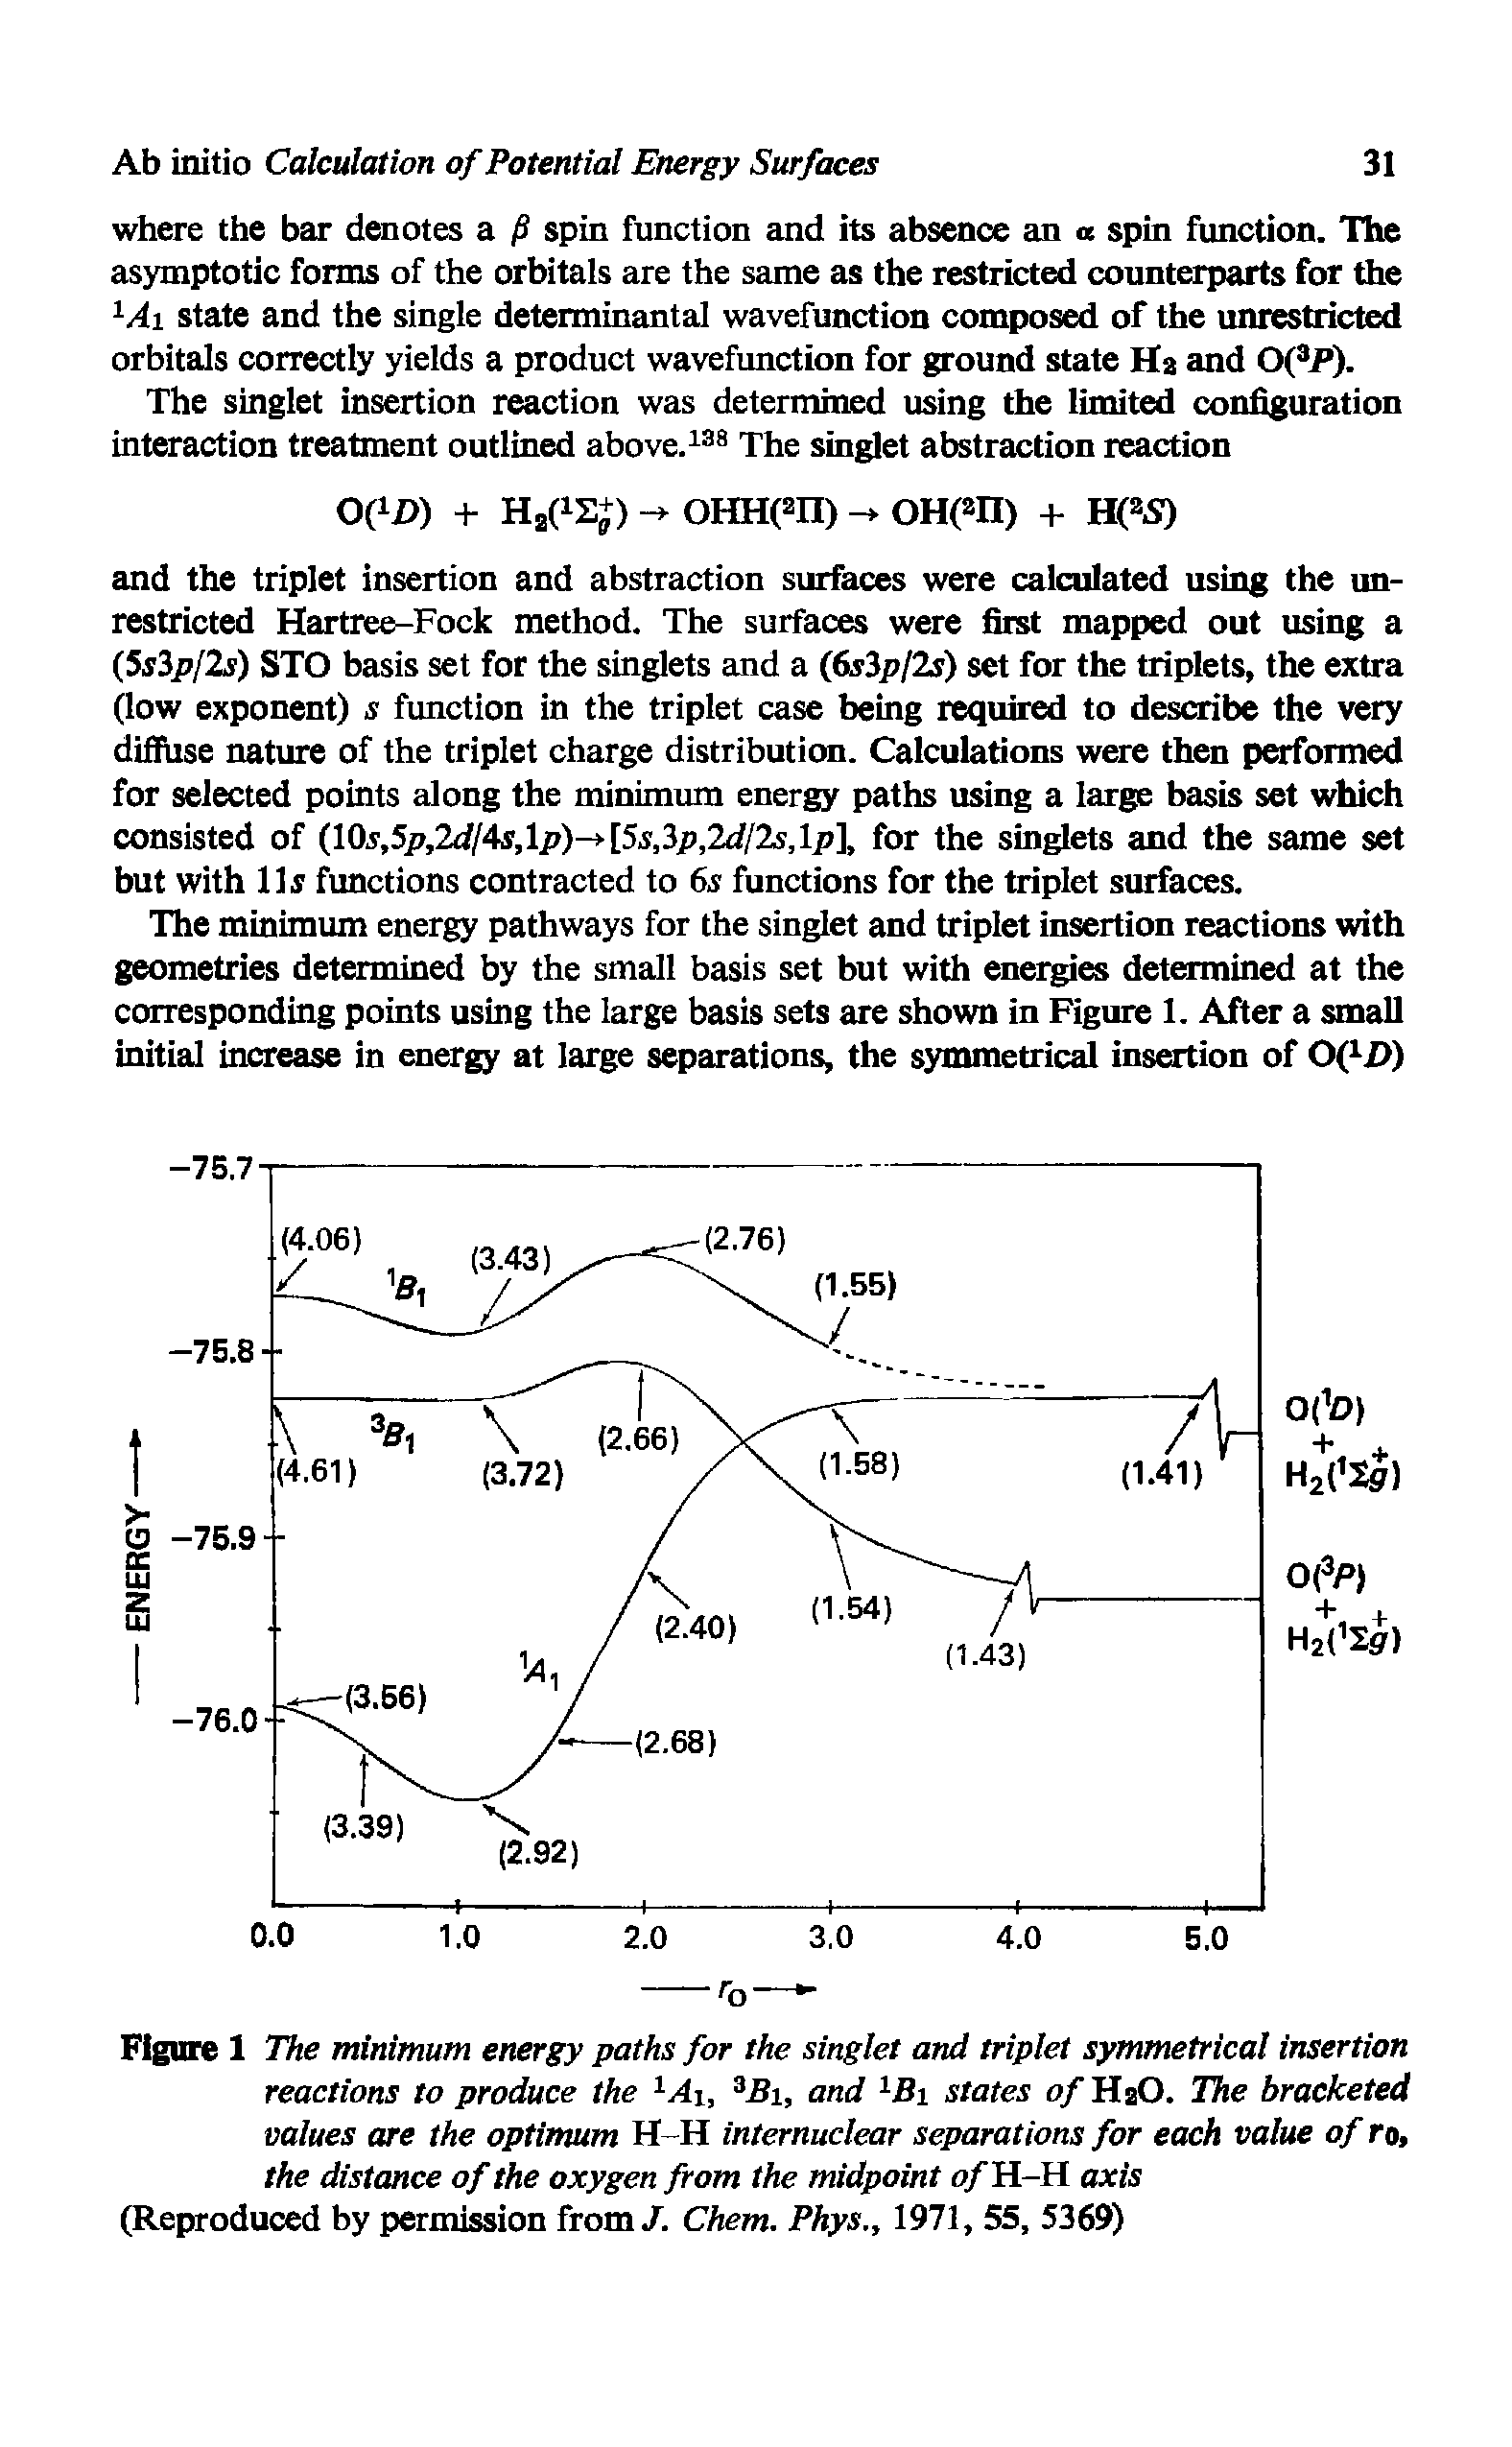 Figure 1 The minimum energy paths for the singlet and triplet symmetrical insertion reactions to produce the 1Ai, 3Bi, and 1Bi states o/HaO. The bracketed values are the optimum H H internuclear separations for each value of ro, the distance of the oxygen from the midpoint o/H-H axis (Reproduced by permission from/. Chem. Phys., 1971, 55, 5369)...